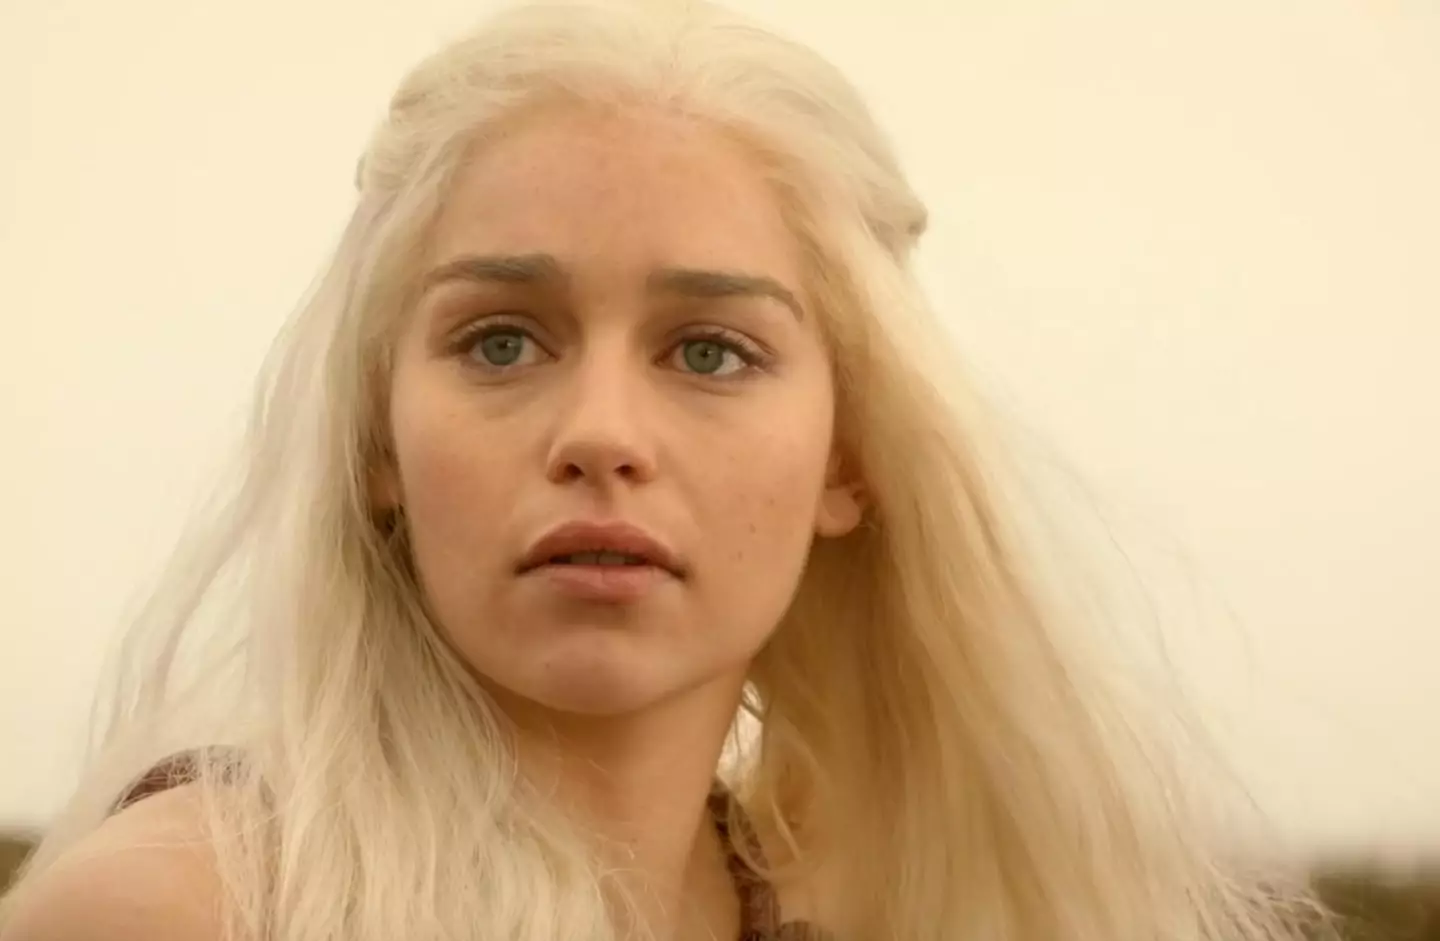 Fans wished Daenerys Targaryen had received the same ending in Game of Thrones.